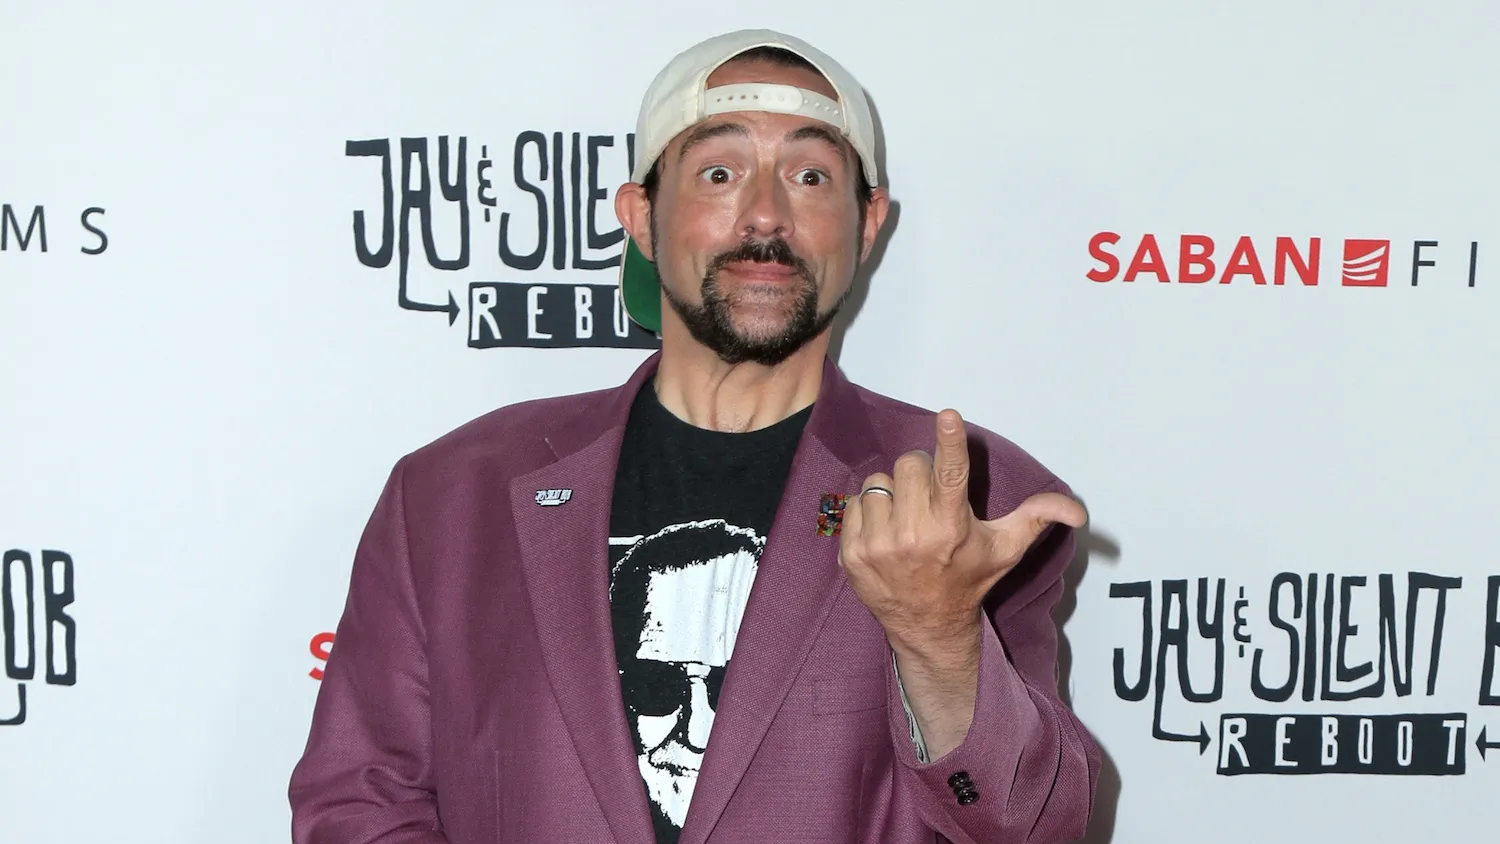 Kevin Smith. Image: Shutterstock